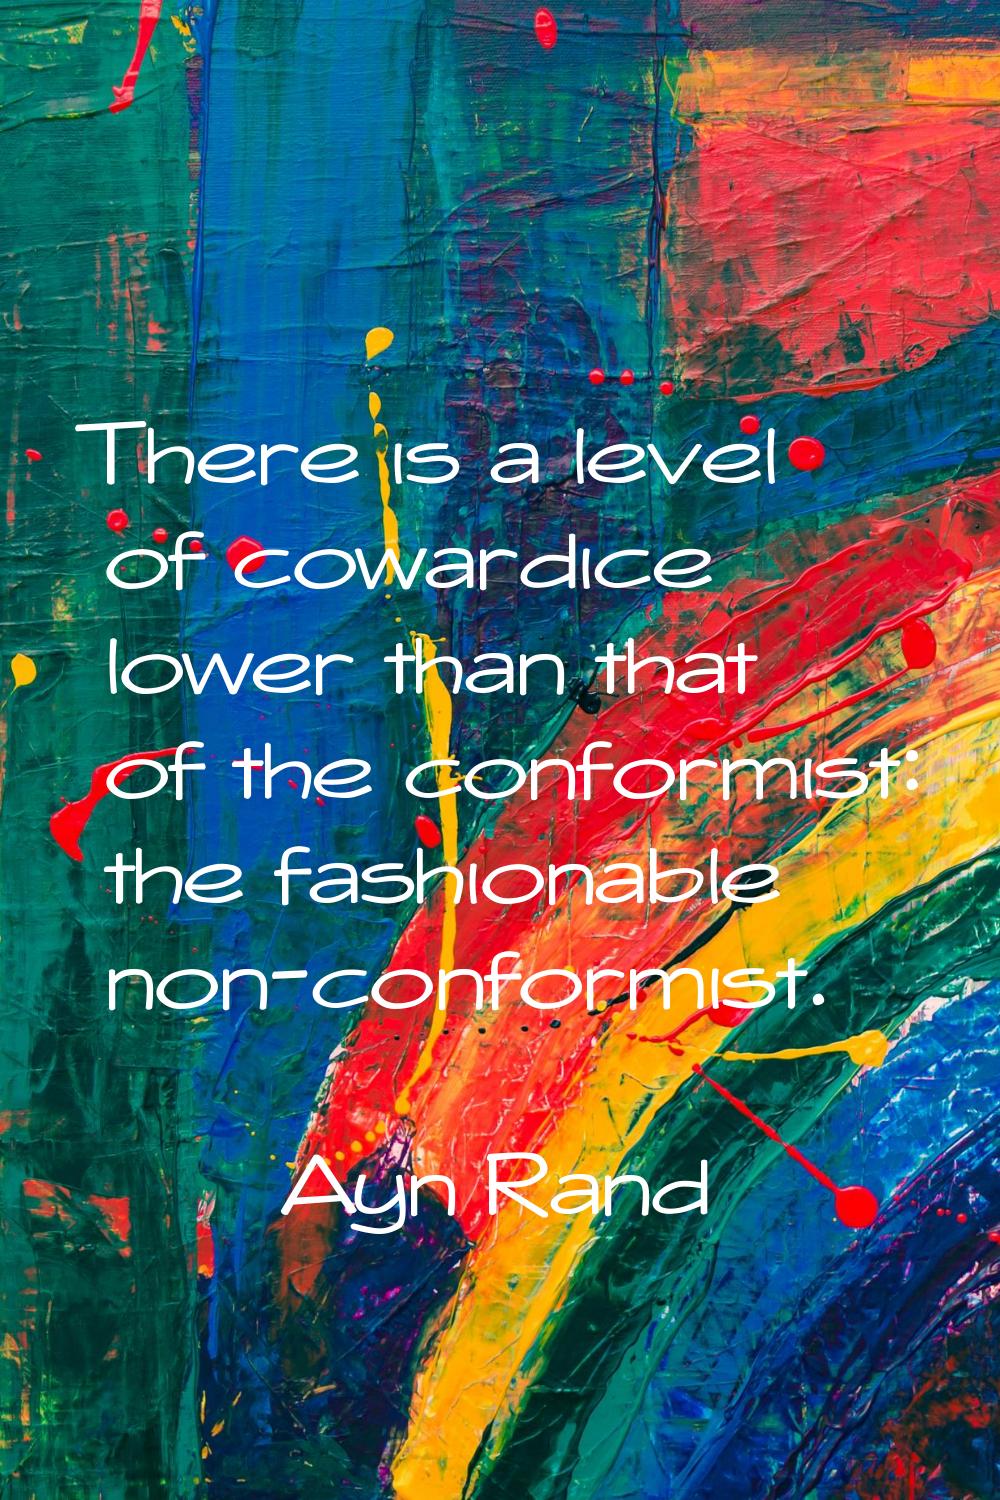 There is a level of cowardice lower than that of the conformist: the fashionable non-conformist.